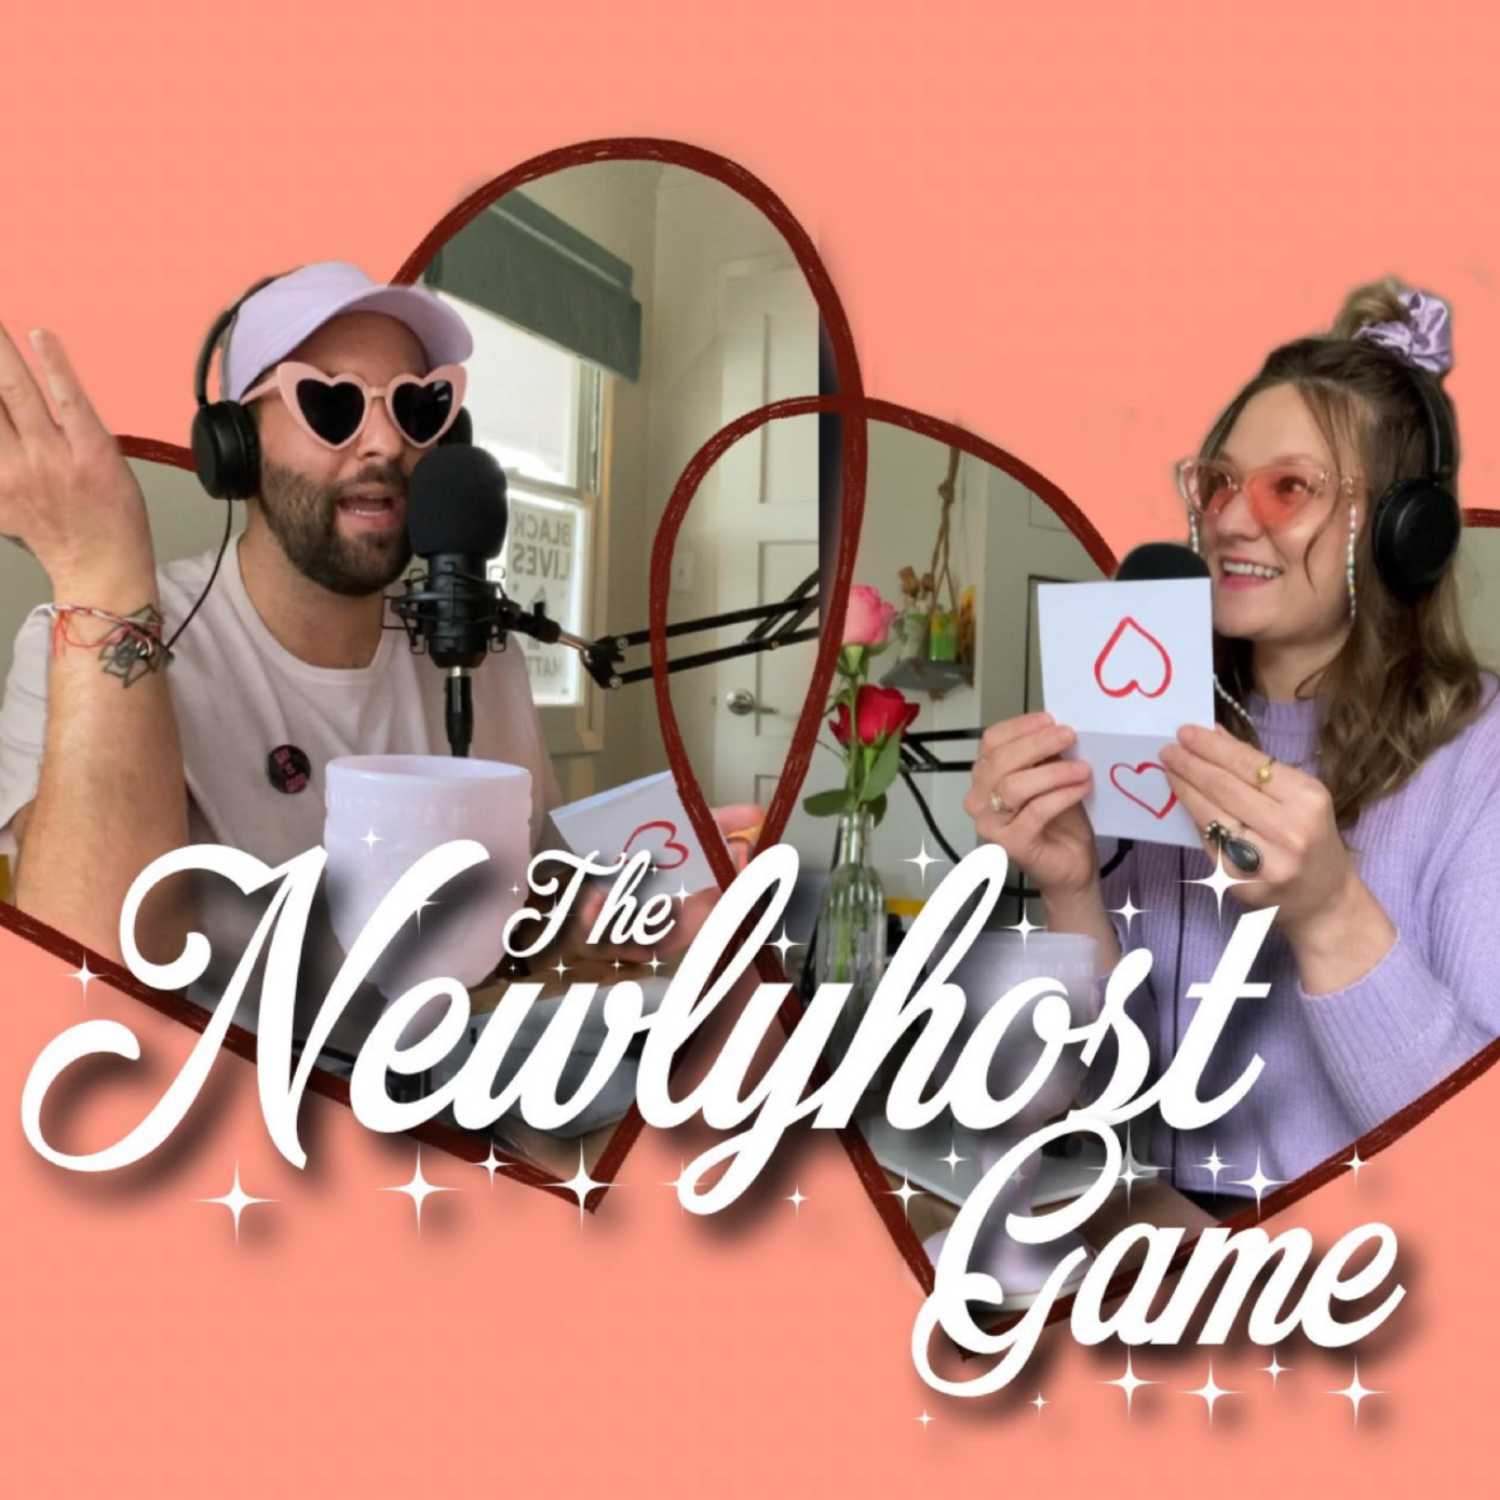 Quick Cuts | The NewlyHost Game